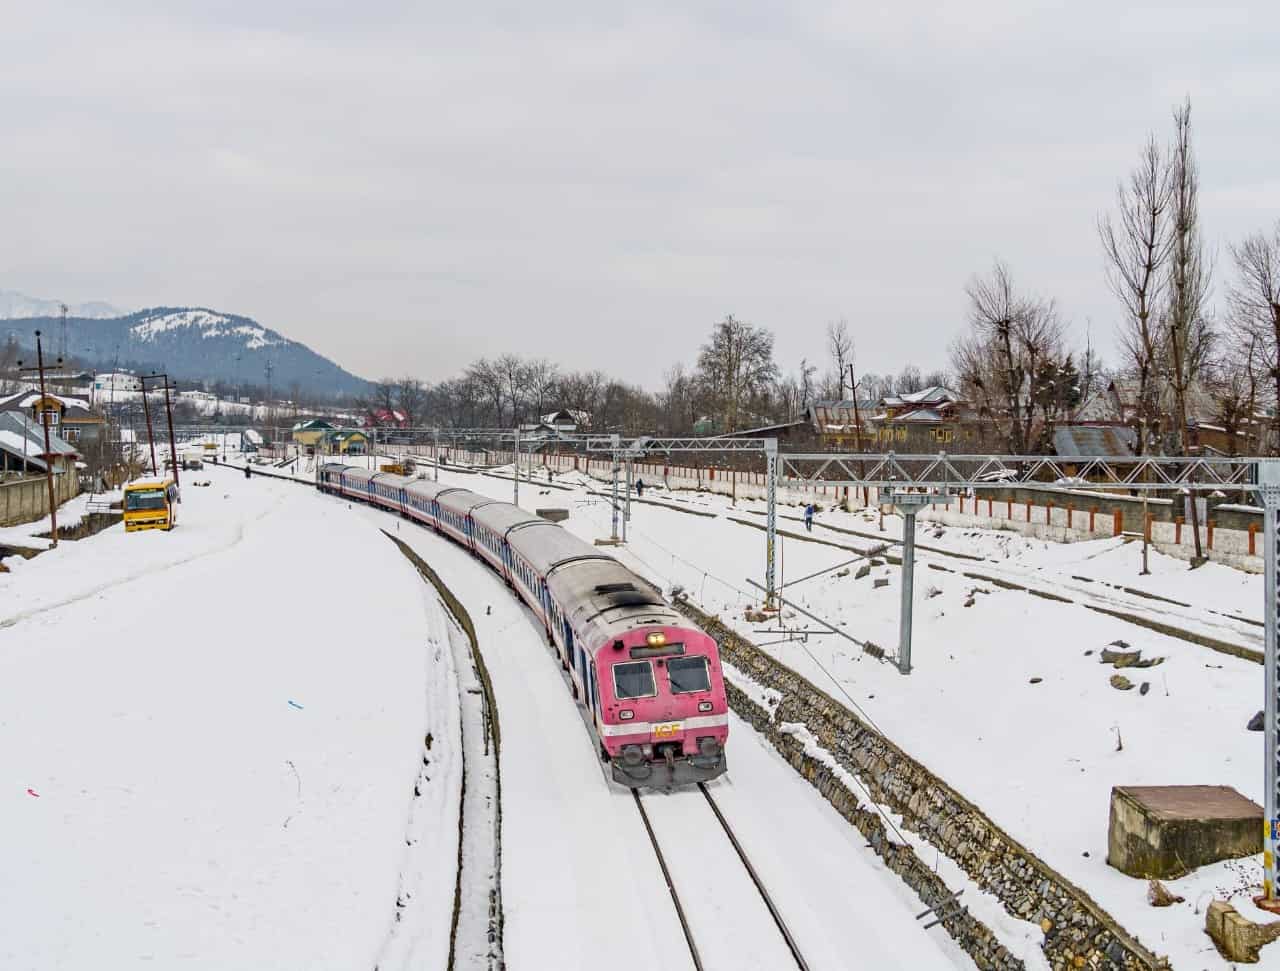 Snow-clad station goes viral